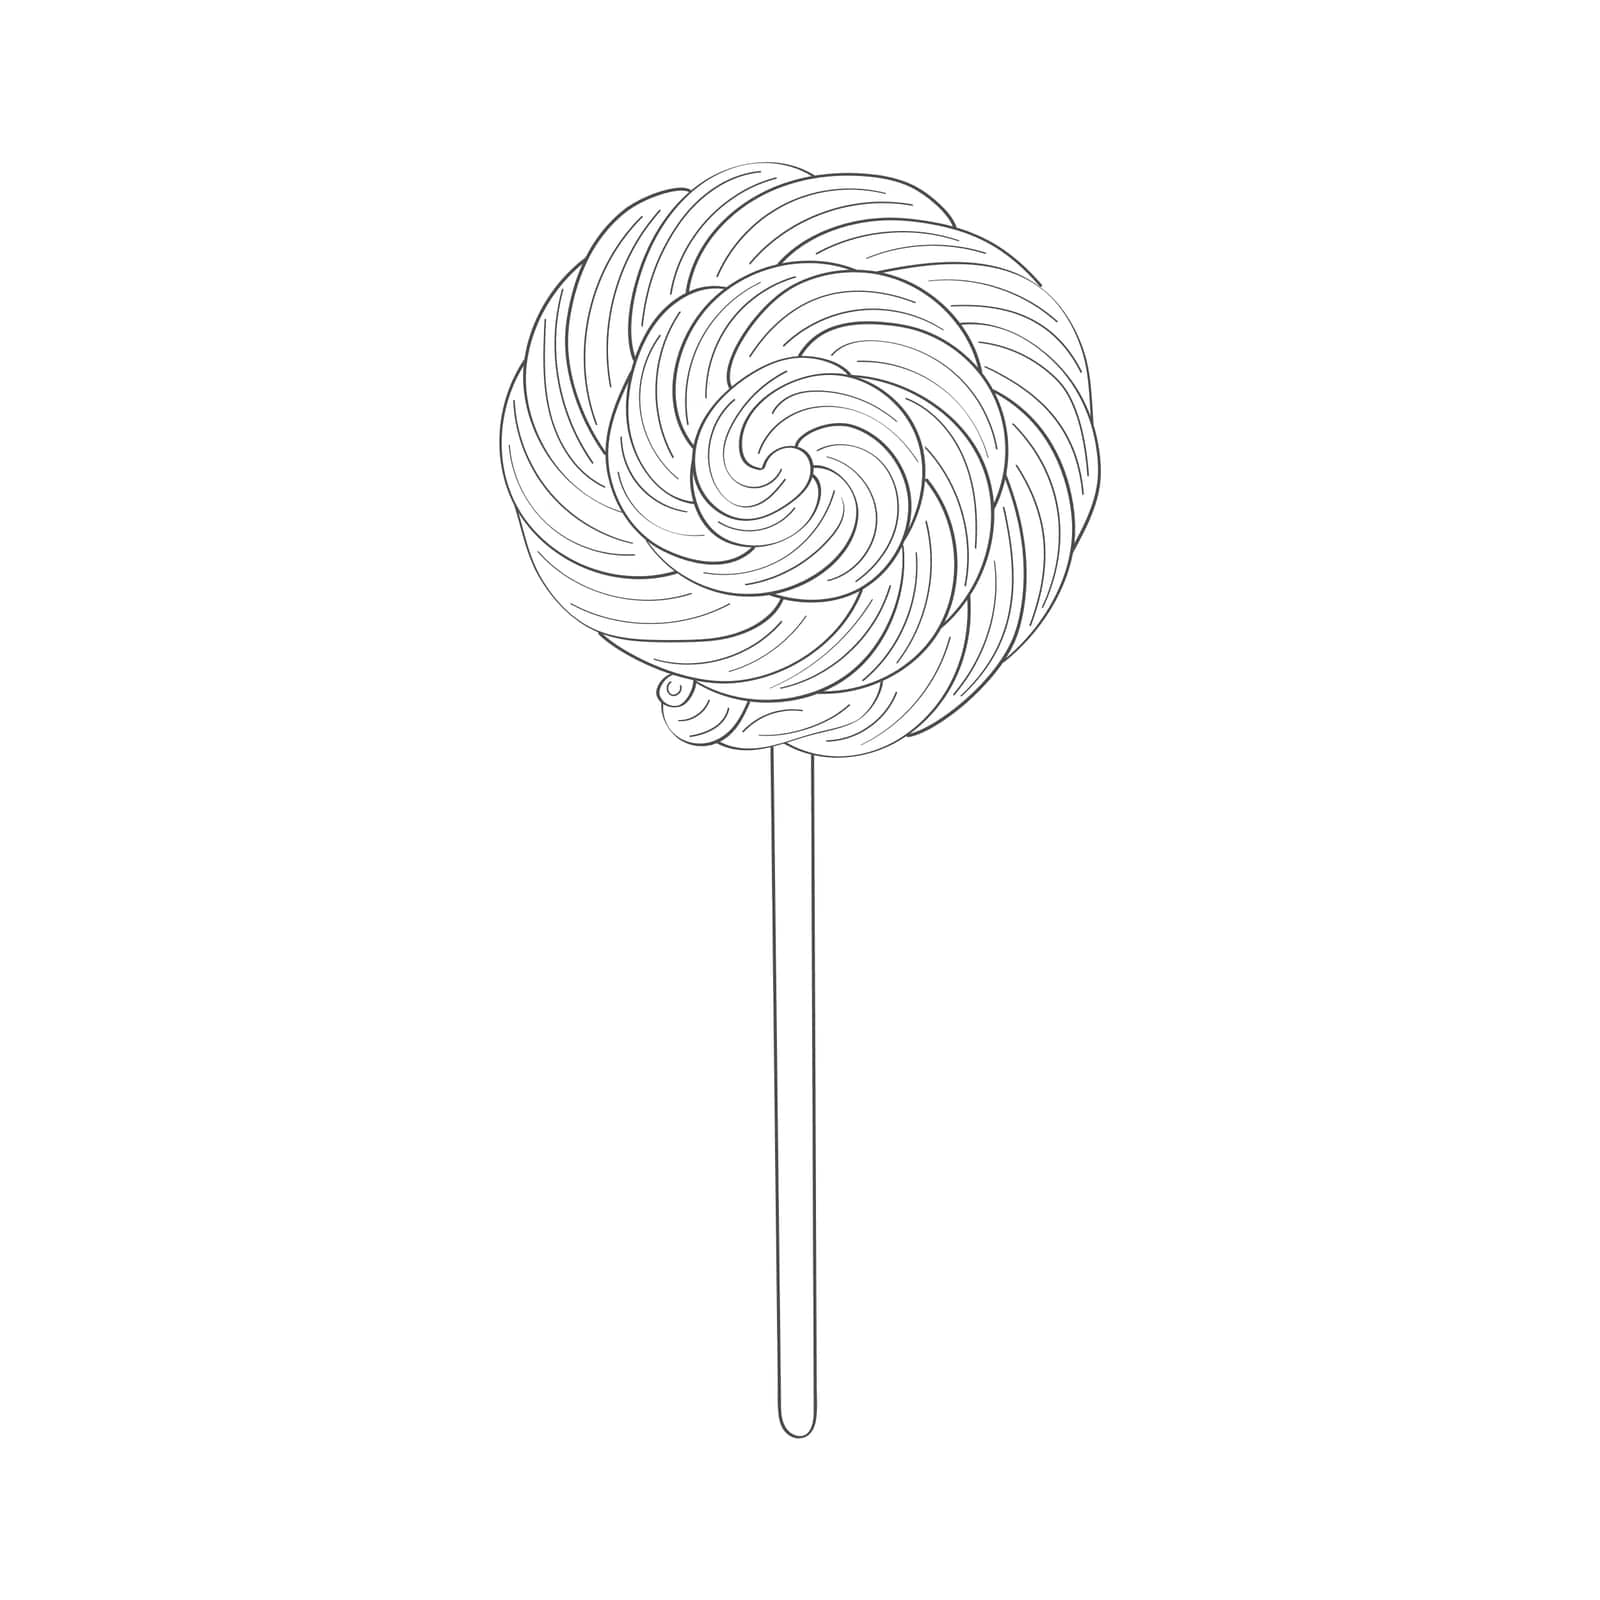 This hand-drawn illustration depicts a lollipop on a stick. The lollipop features swirls against a simple background